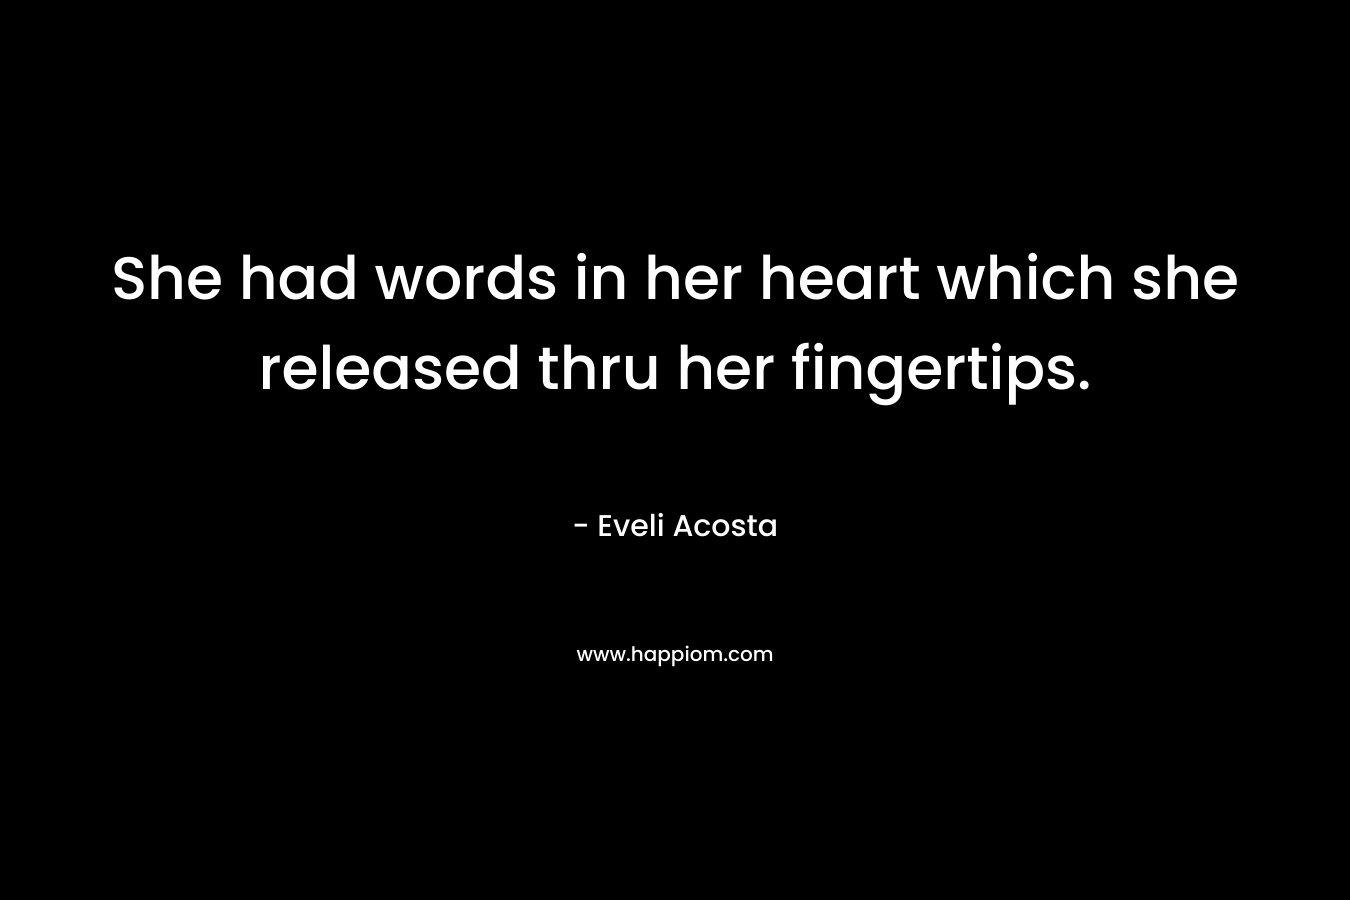 She had words in her heart which she released thru her fingertips. – Eveli Acosta